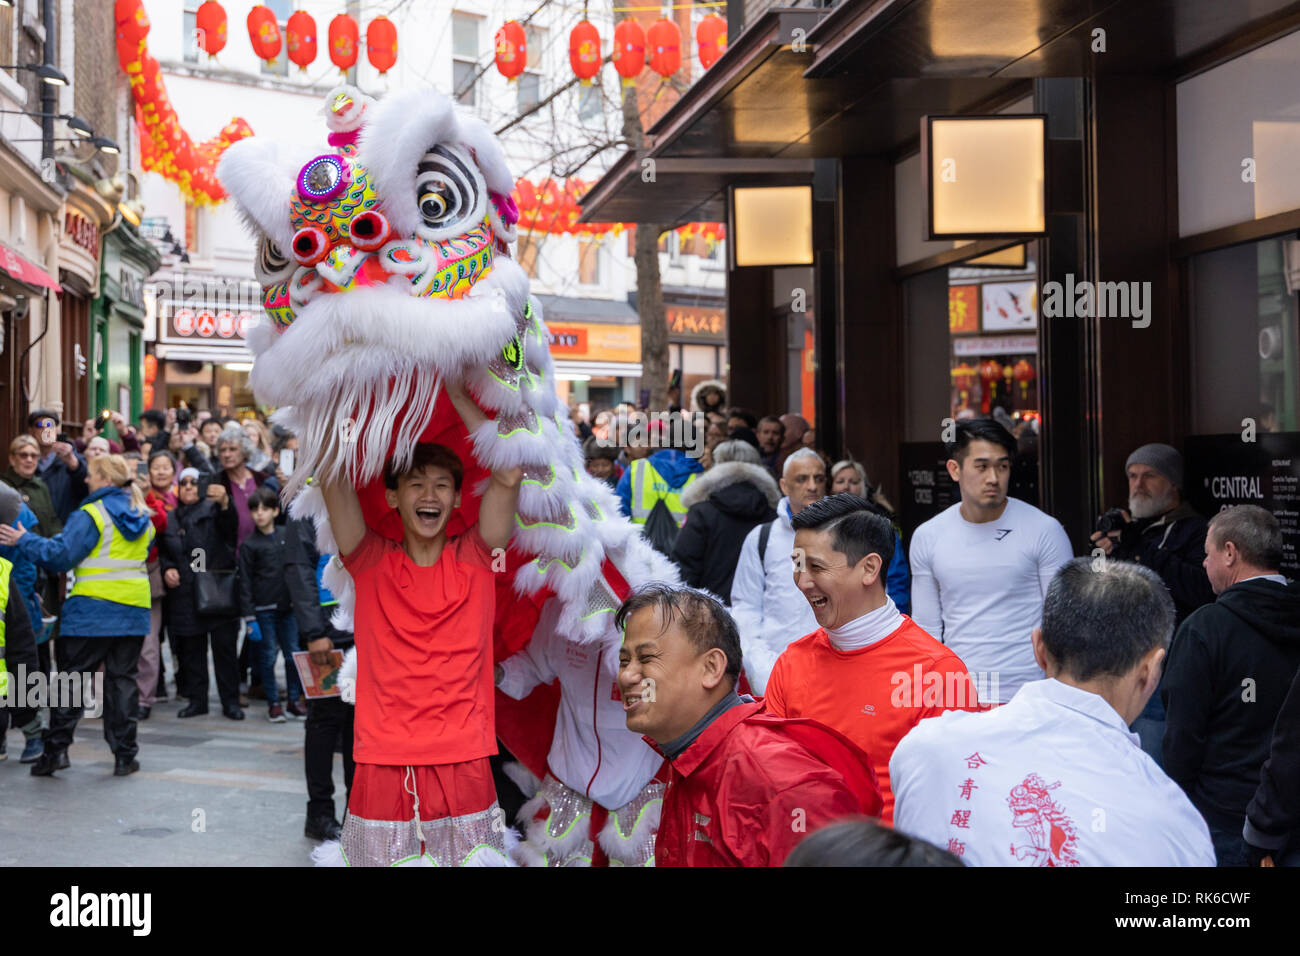 London, UK. 09th February, 2019. Dancers enjoying dragon dance in front of  a crowd near one of the restaurants during the Chinese New Year celebrations in London Chinatown, UK. Stock Photo